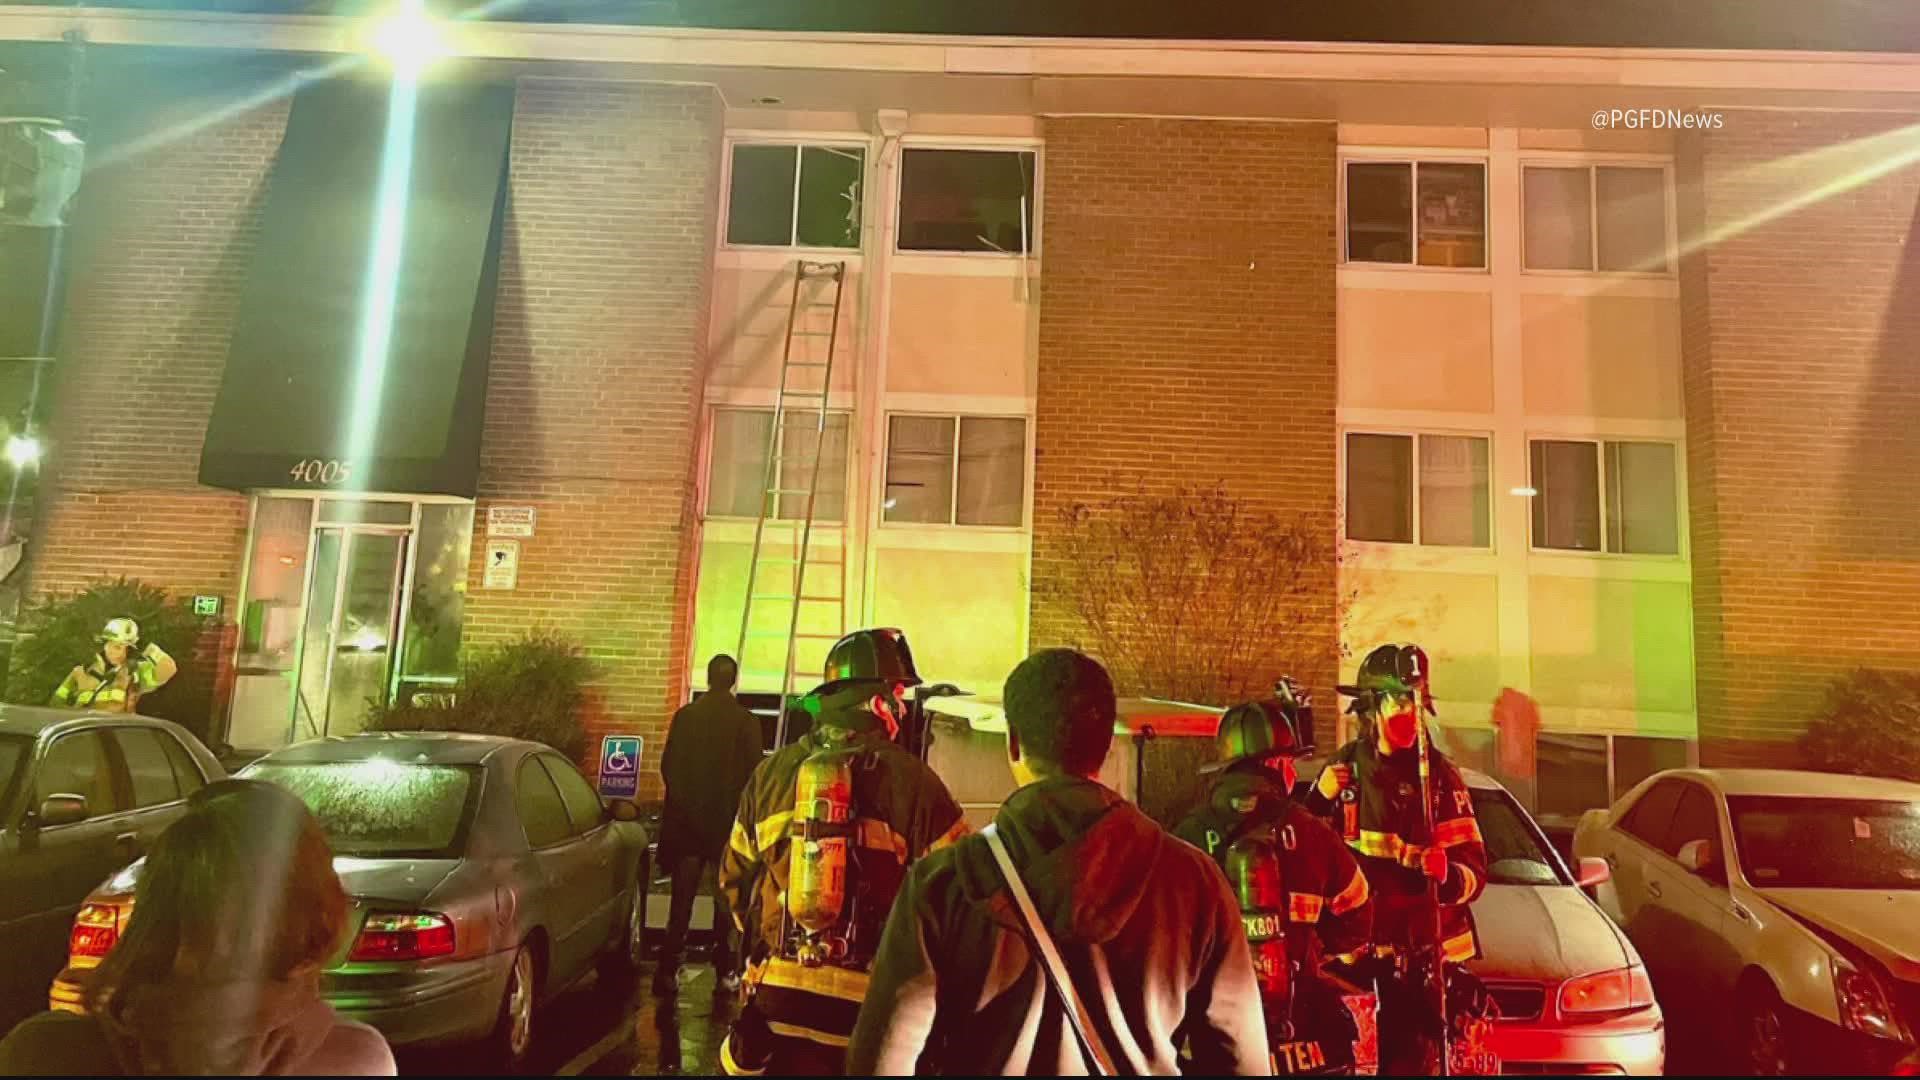 Prince George's Fire Department units were dispatched to the 4000 block of Warner Avenue in Landover Hills, Maryland, around 11:30 p.m.